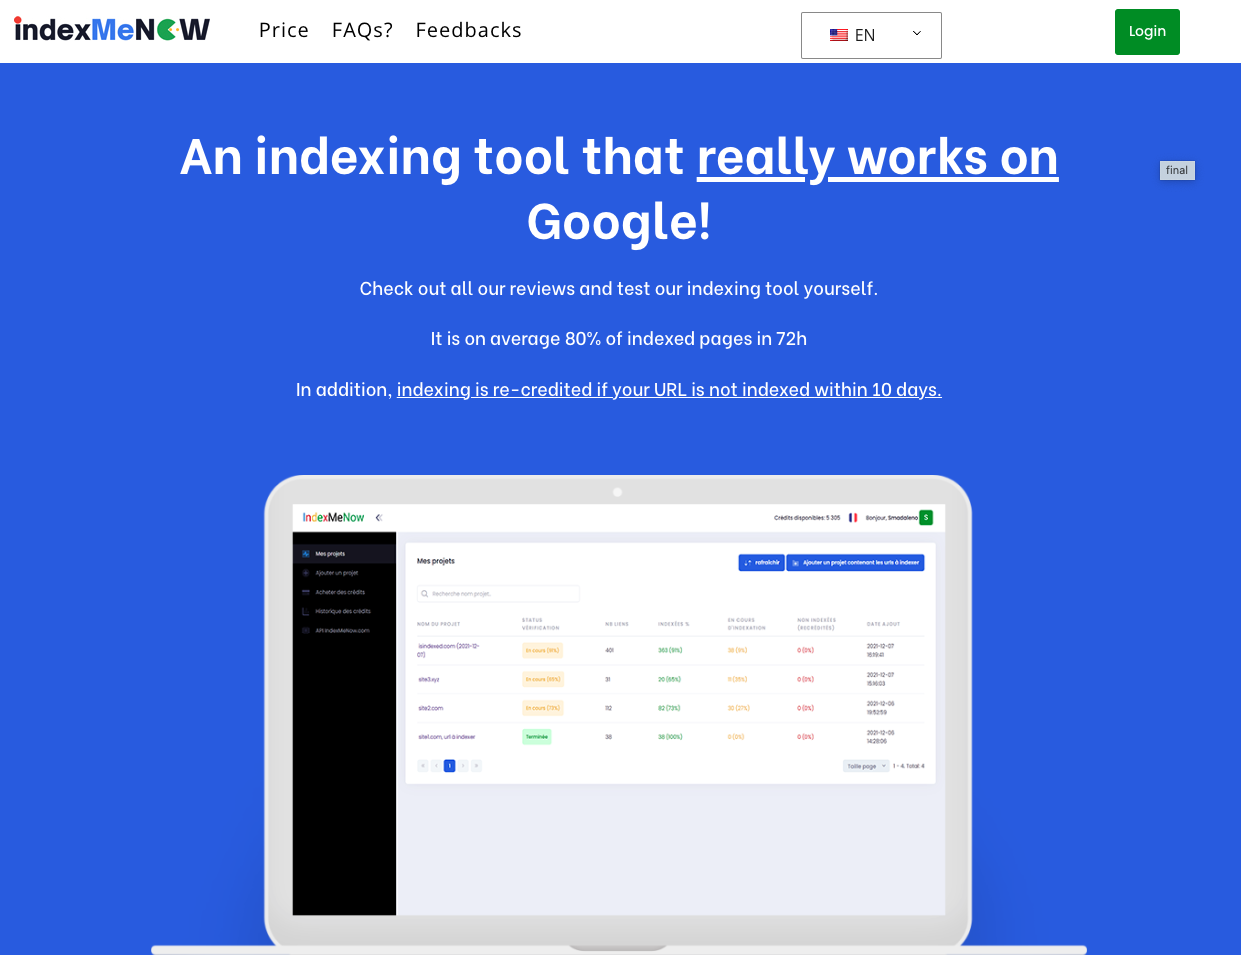 User interface of IndexMeNow